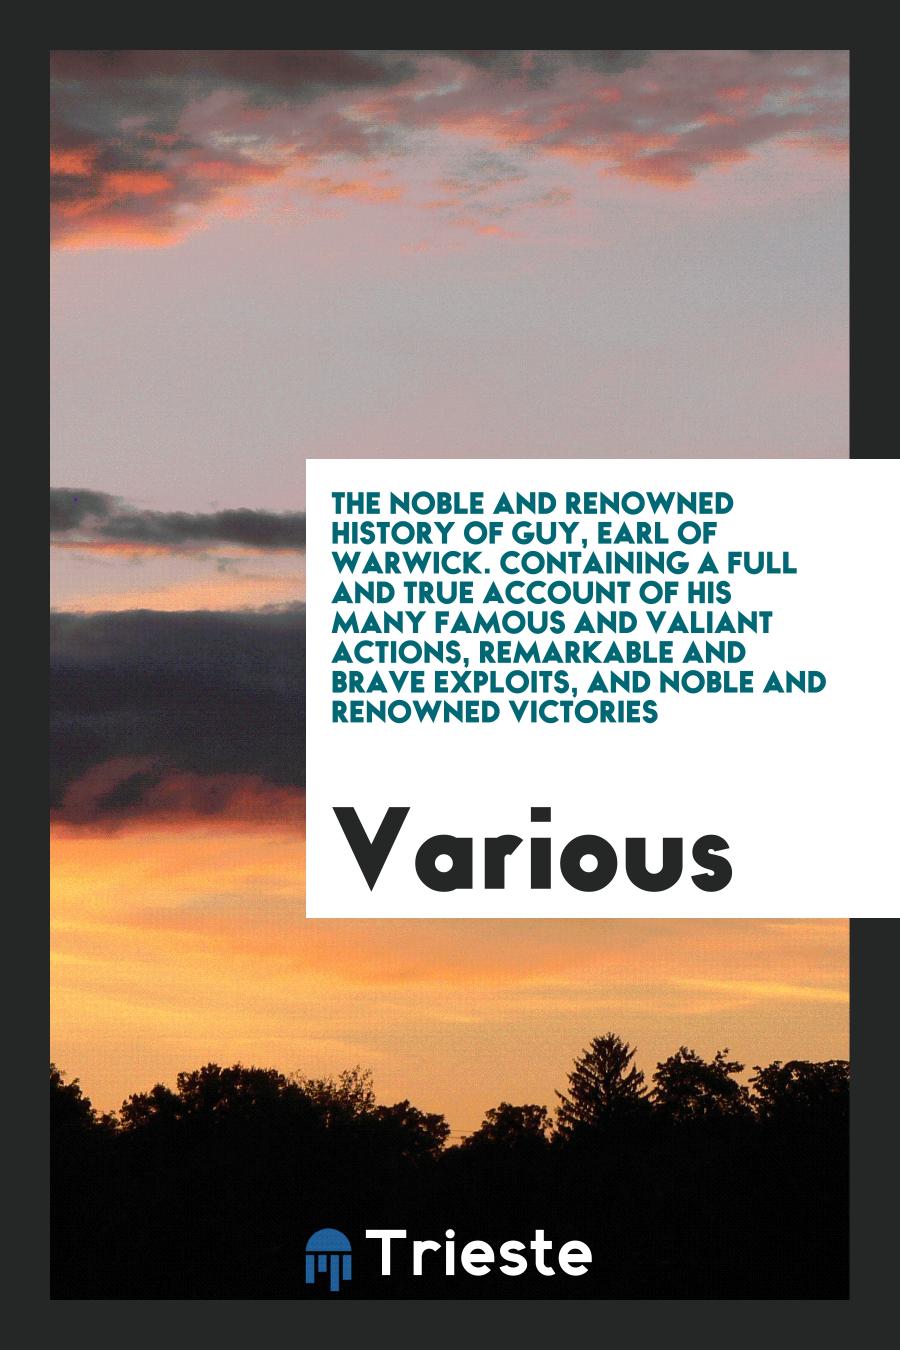 The noble and renowned history of Guy, Earl of Warwick. Containing a full and true account of his many famous and valiant actions, remarkable and brave exploits, and noble and renowned victories